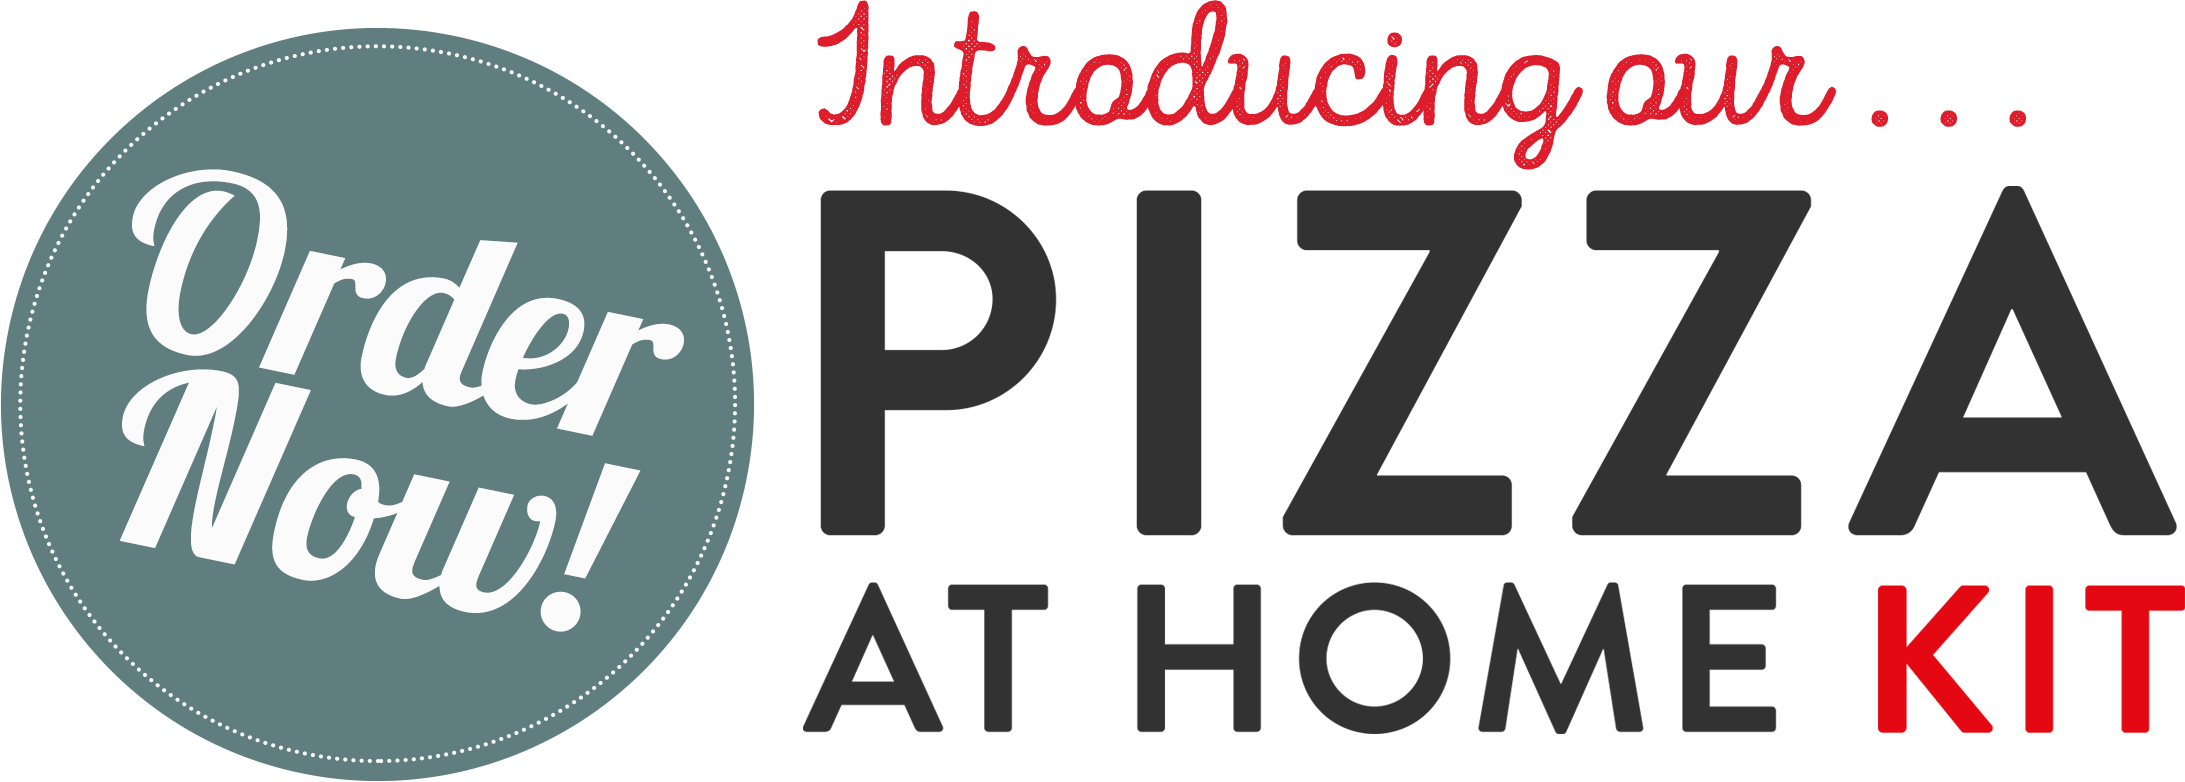 order pizza at home kit